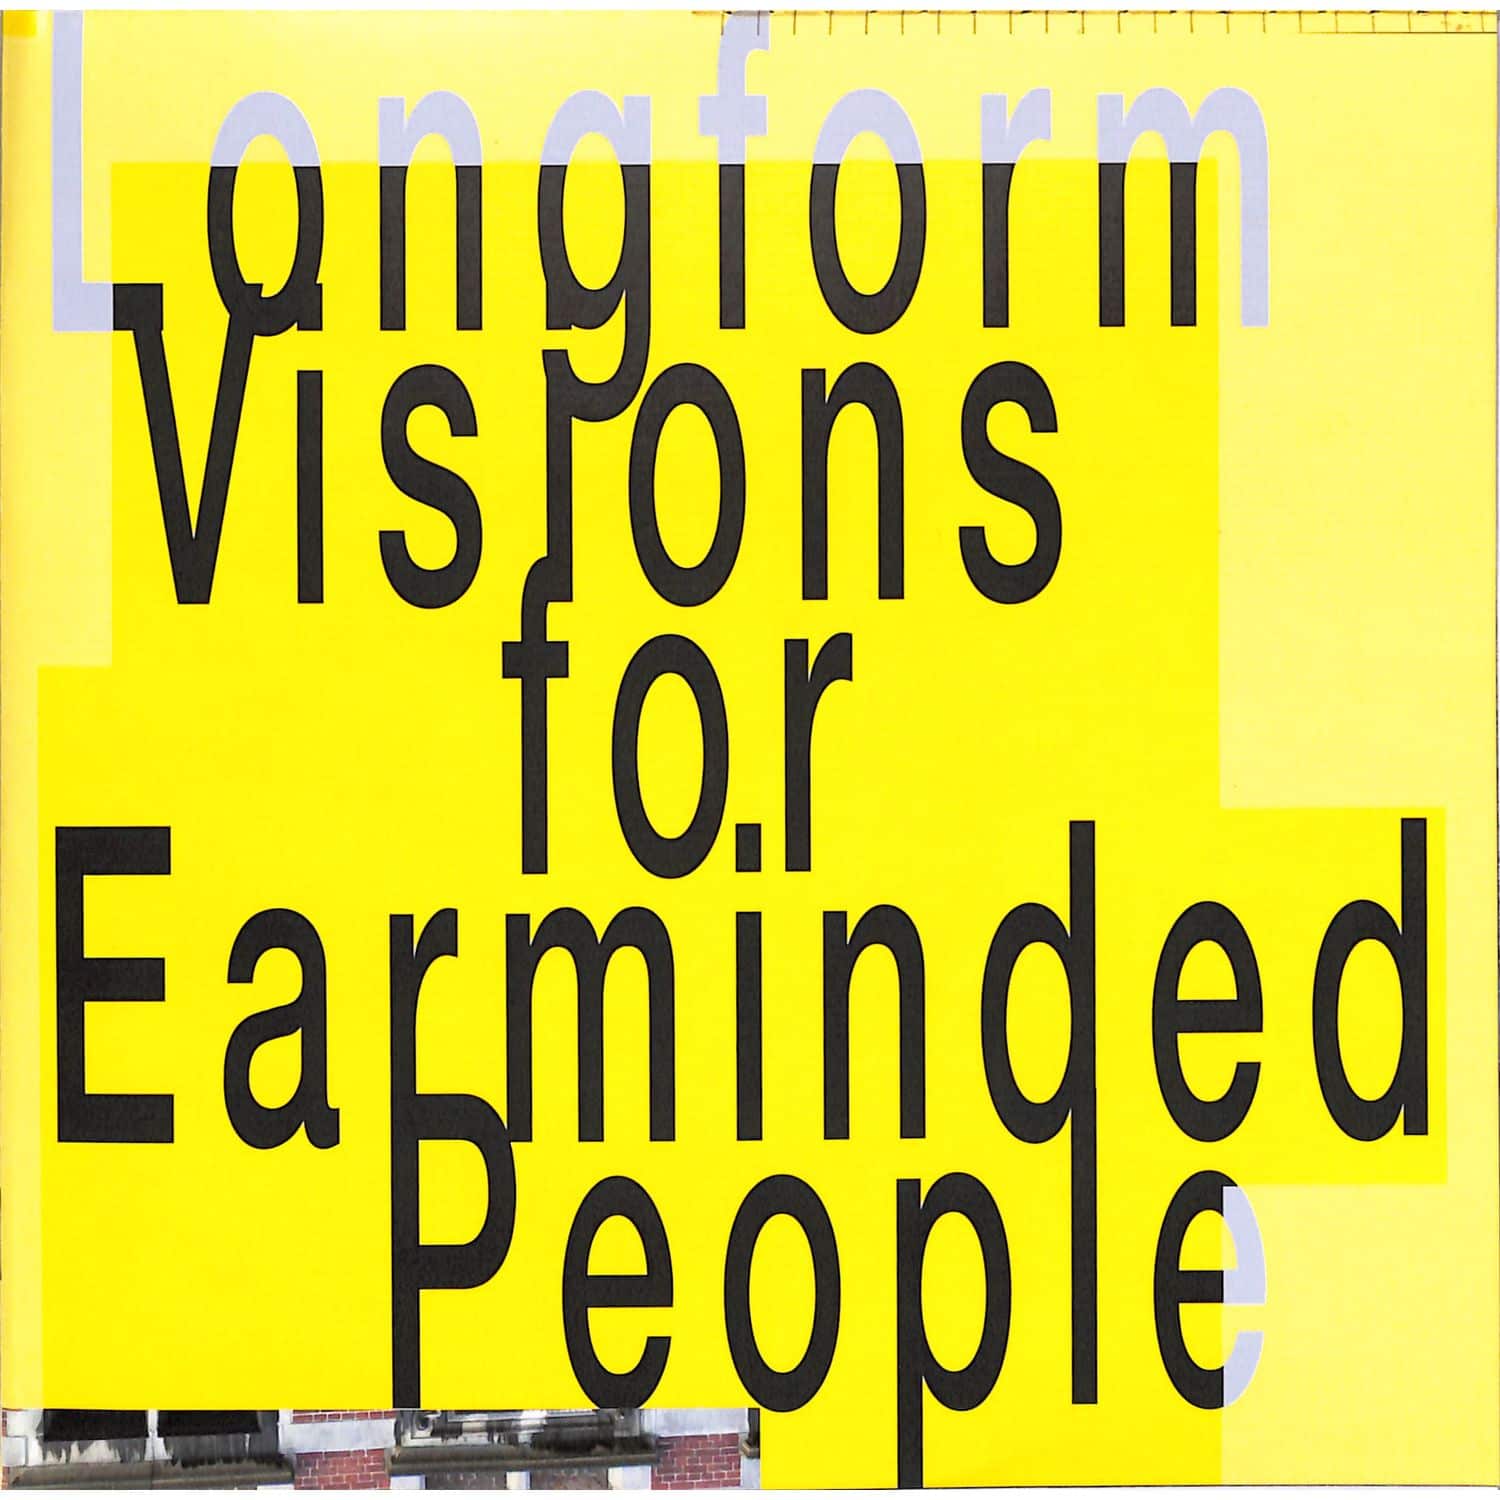 Various Artists - LONGFORM VISIONS FOR EARMINDED PEOPLE 